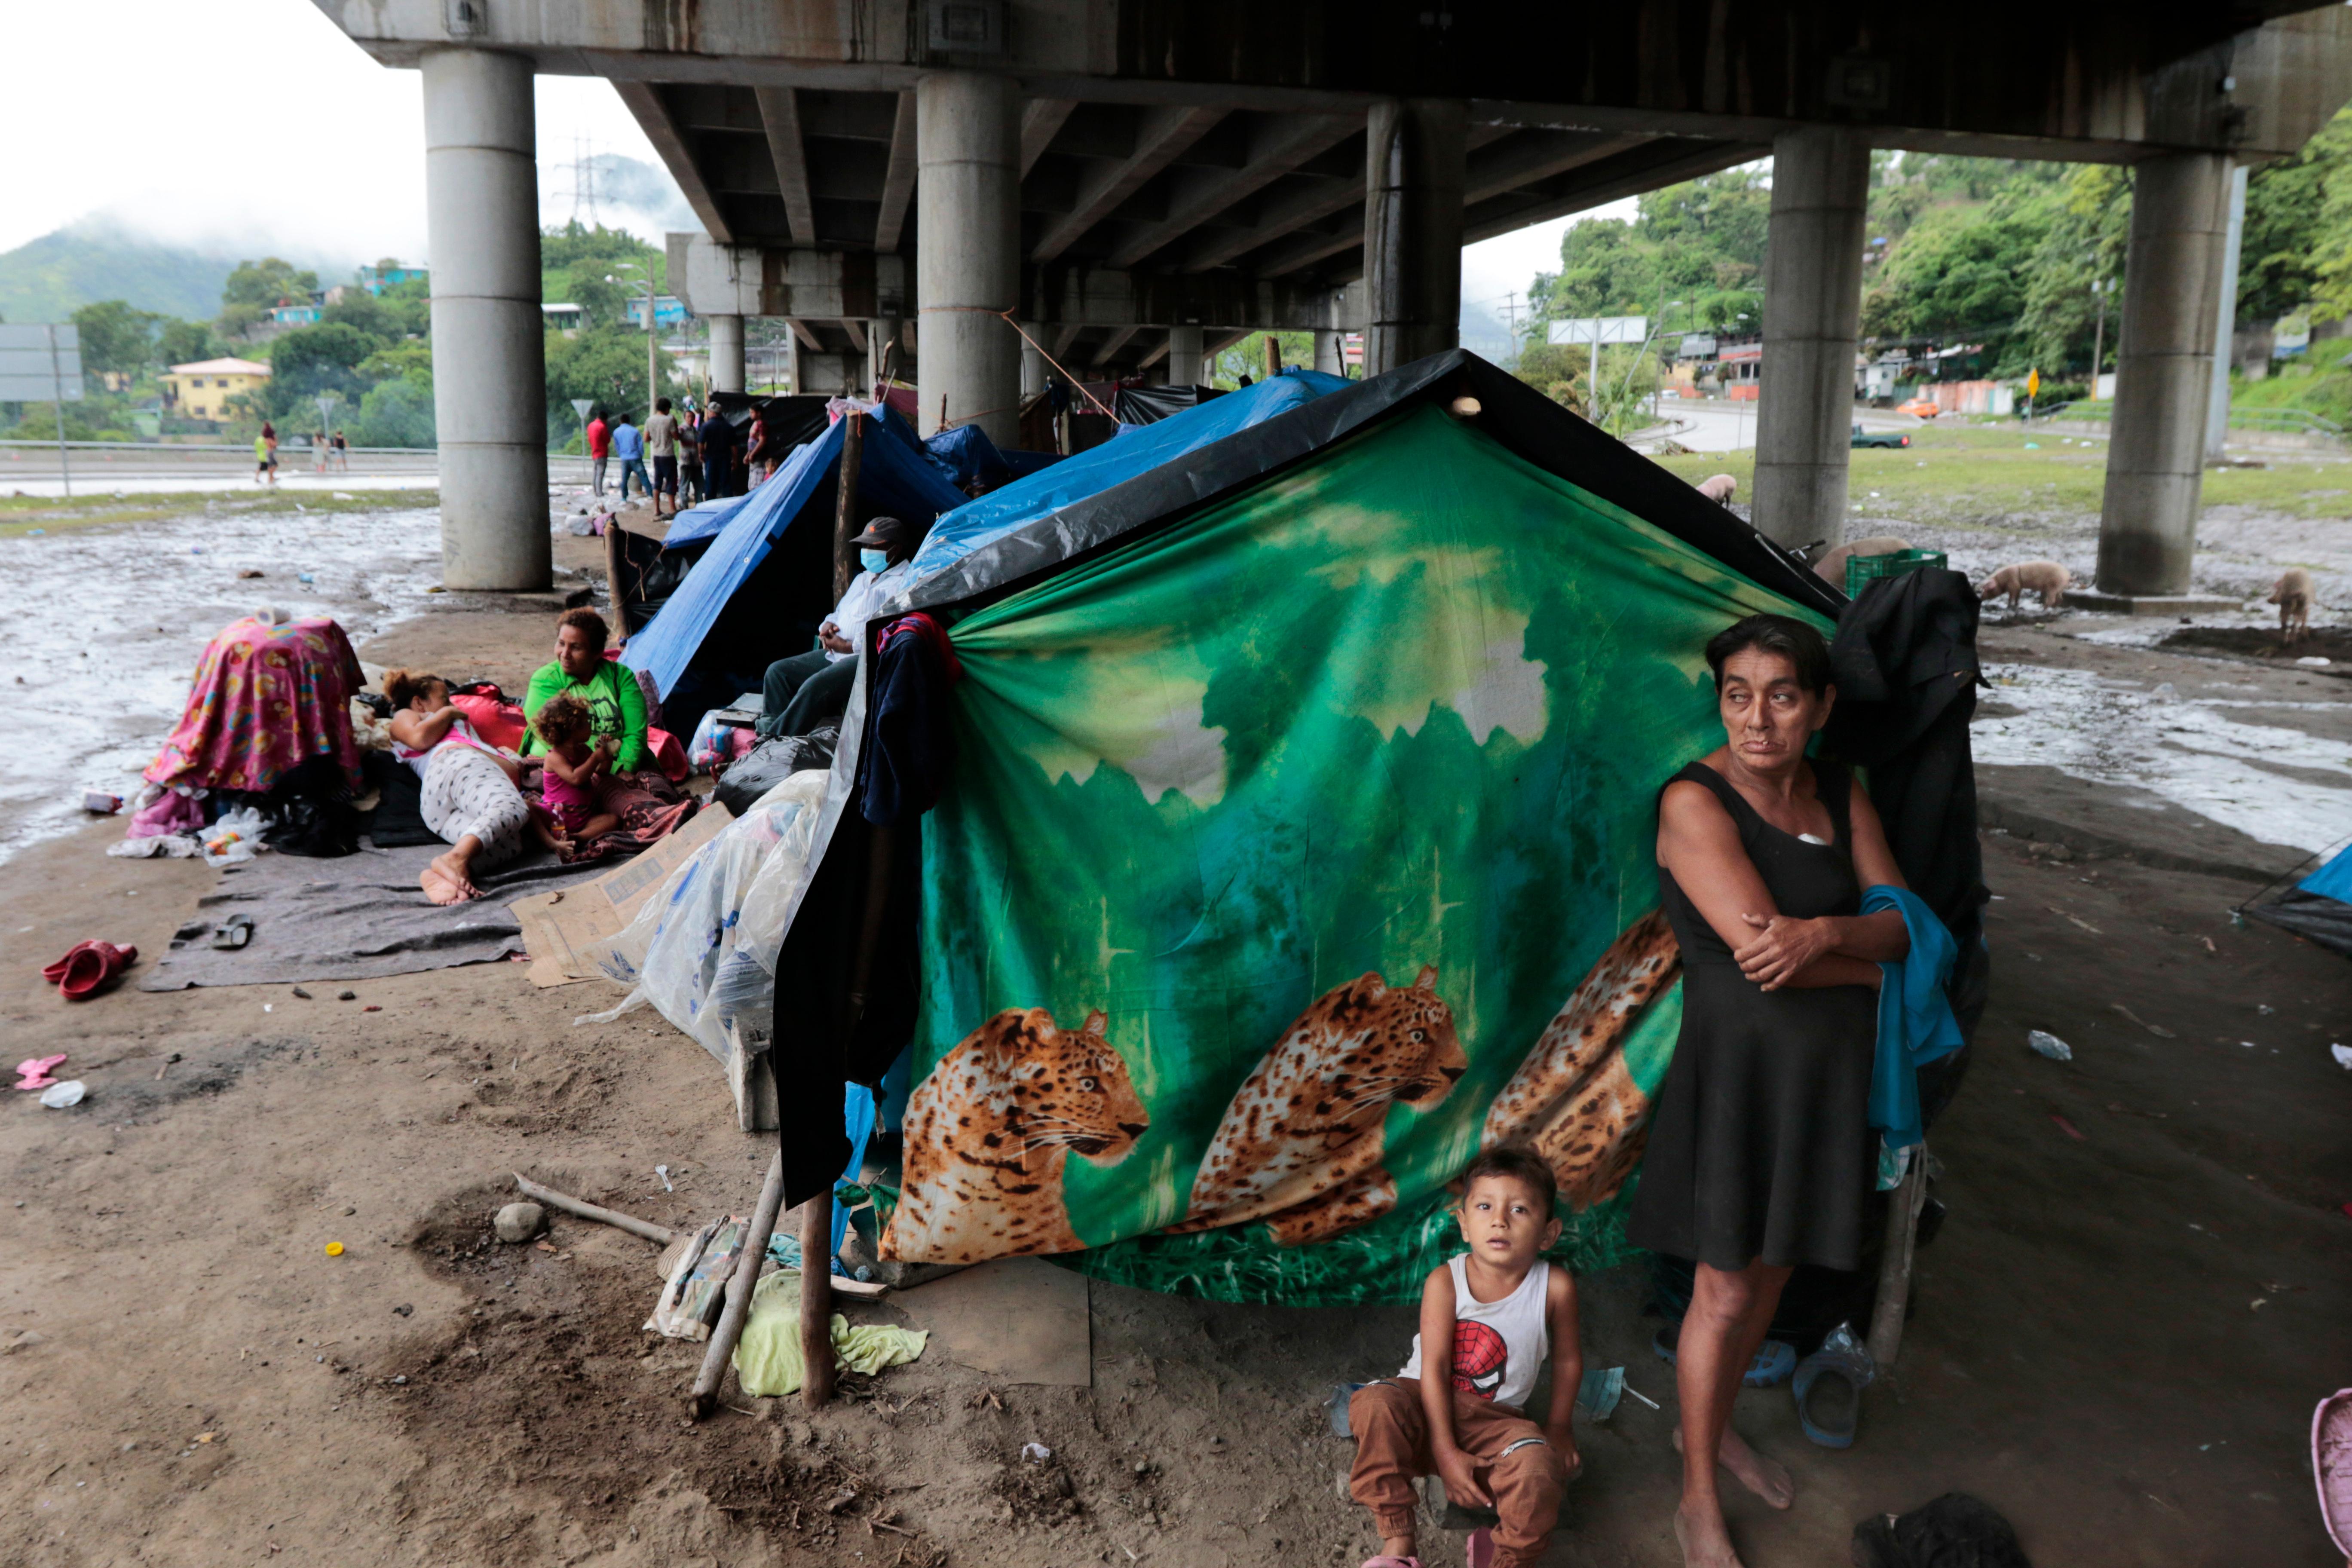 Hurricane victims take refuge under a bridge in San Pedro Sula, Honduras, Saturday, Nov. 21, 2020. Shelters for people whose homes were flooded or damaged by hurricanes Eta and Iota in Honduras are now so crowded that thousands of victims have taken refuge under highway overpasses or bridges. The Red Cross estimates that about 4.2 million people were affected by the back-to-back hurricanes in November in Honduras, Nicaragua and Guatemala. (AP Photo/Delmer Martinez)